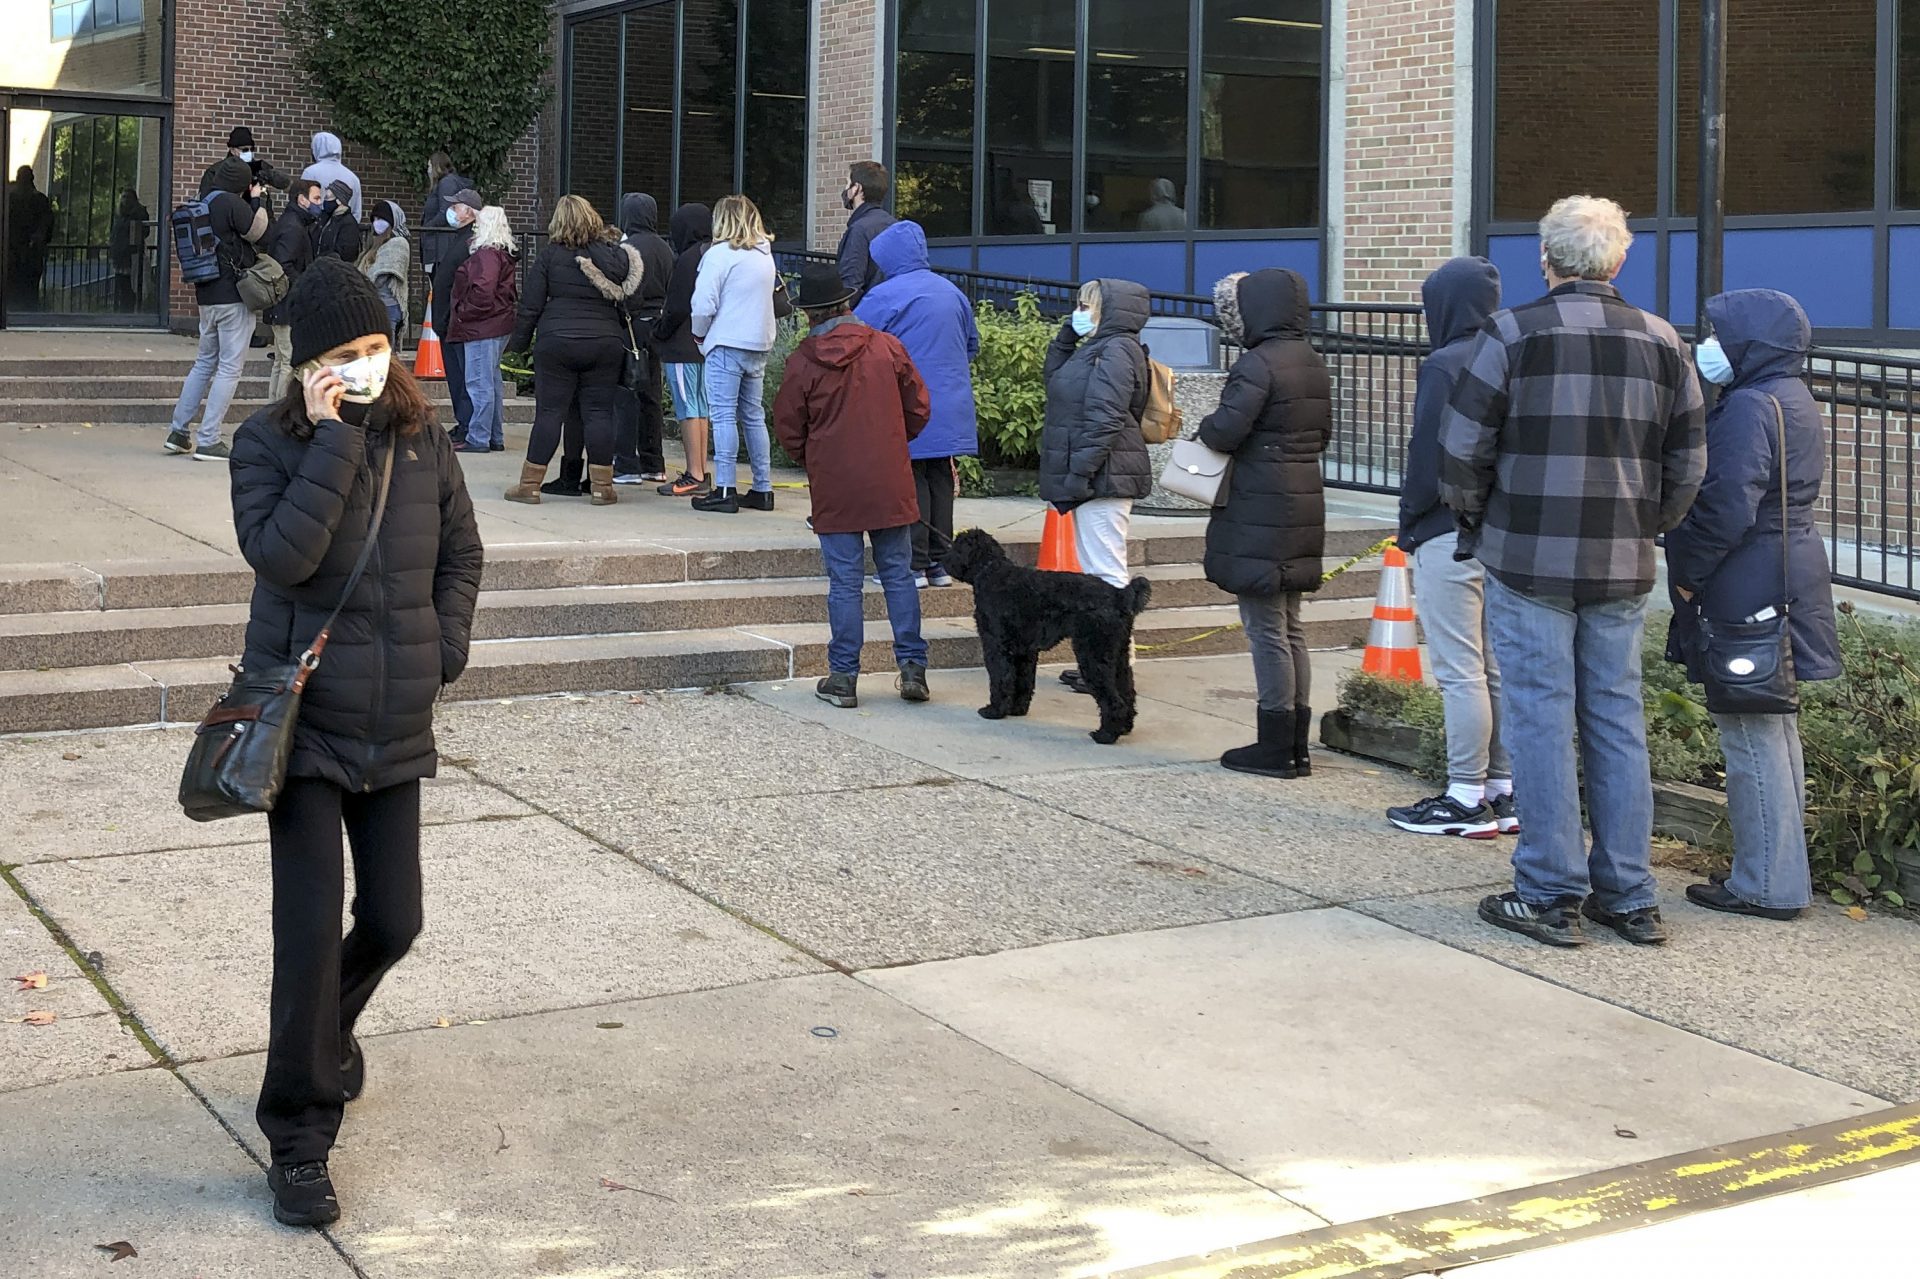 Voters wait in line outside the Bucks county government building in Doylestown, Pa., a suburb of Philadelphia, on Monday, Nov. 2, 2020. Some said they received word that their mail-in ballots had problems and needed to be fixed in order to count.